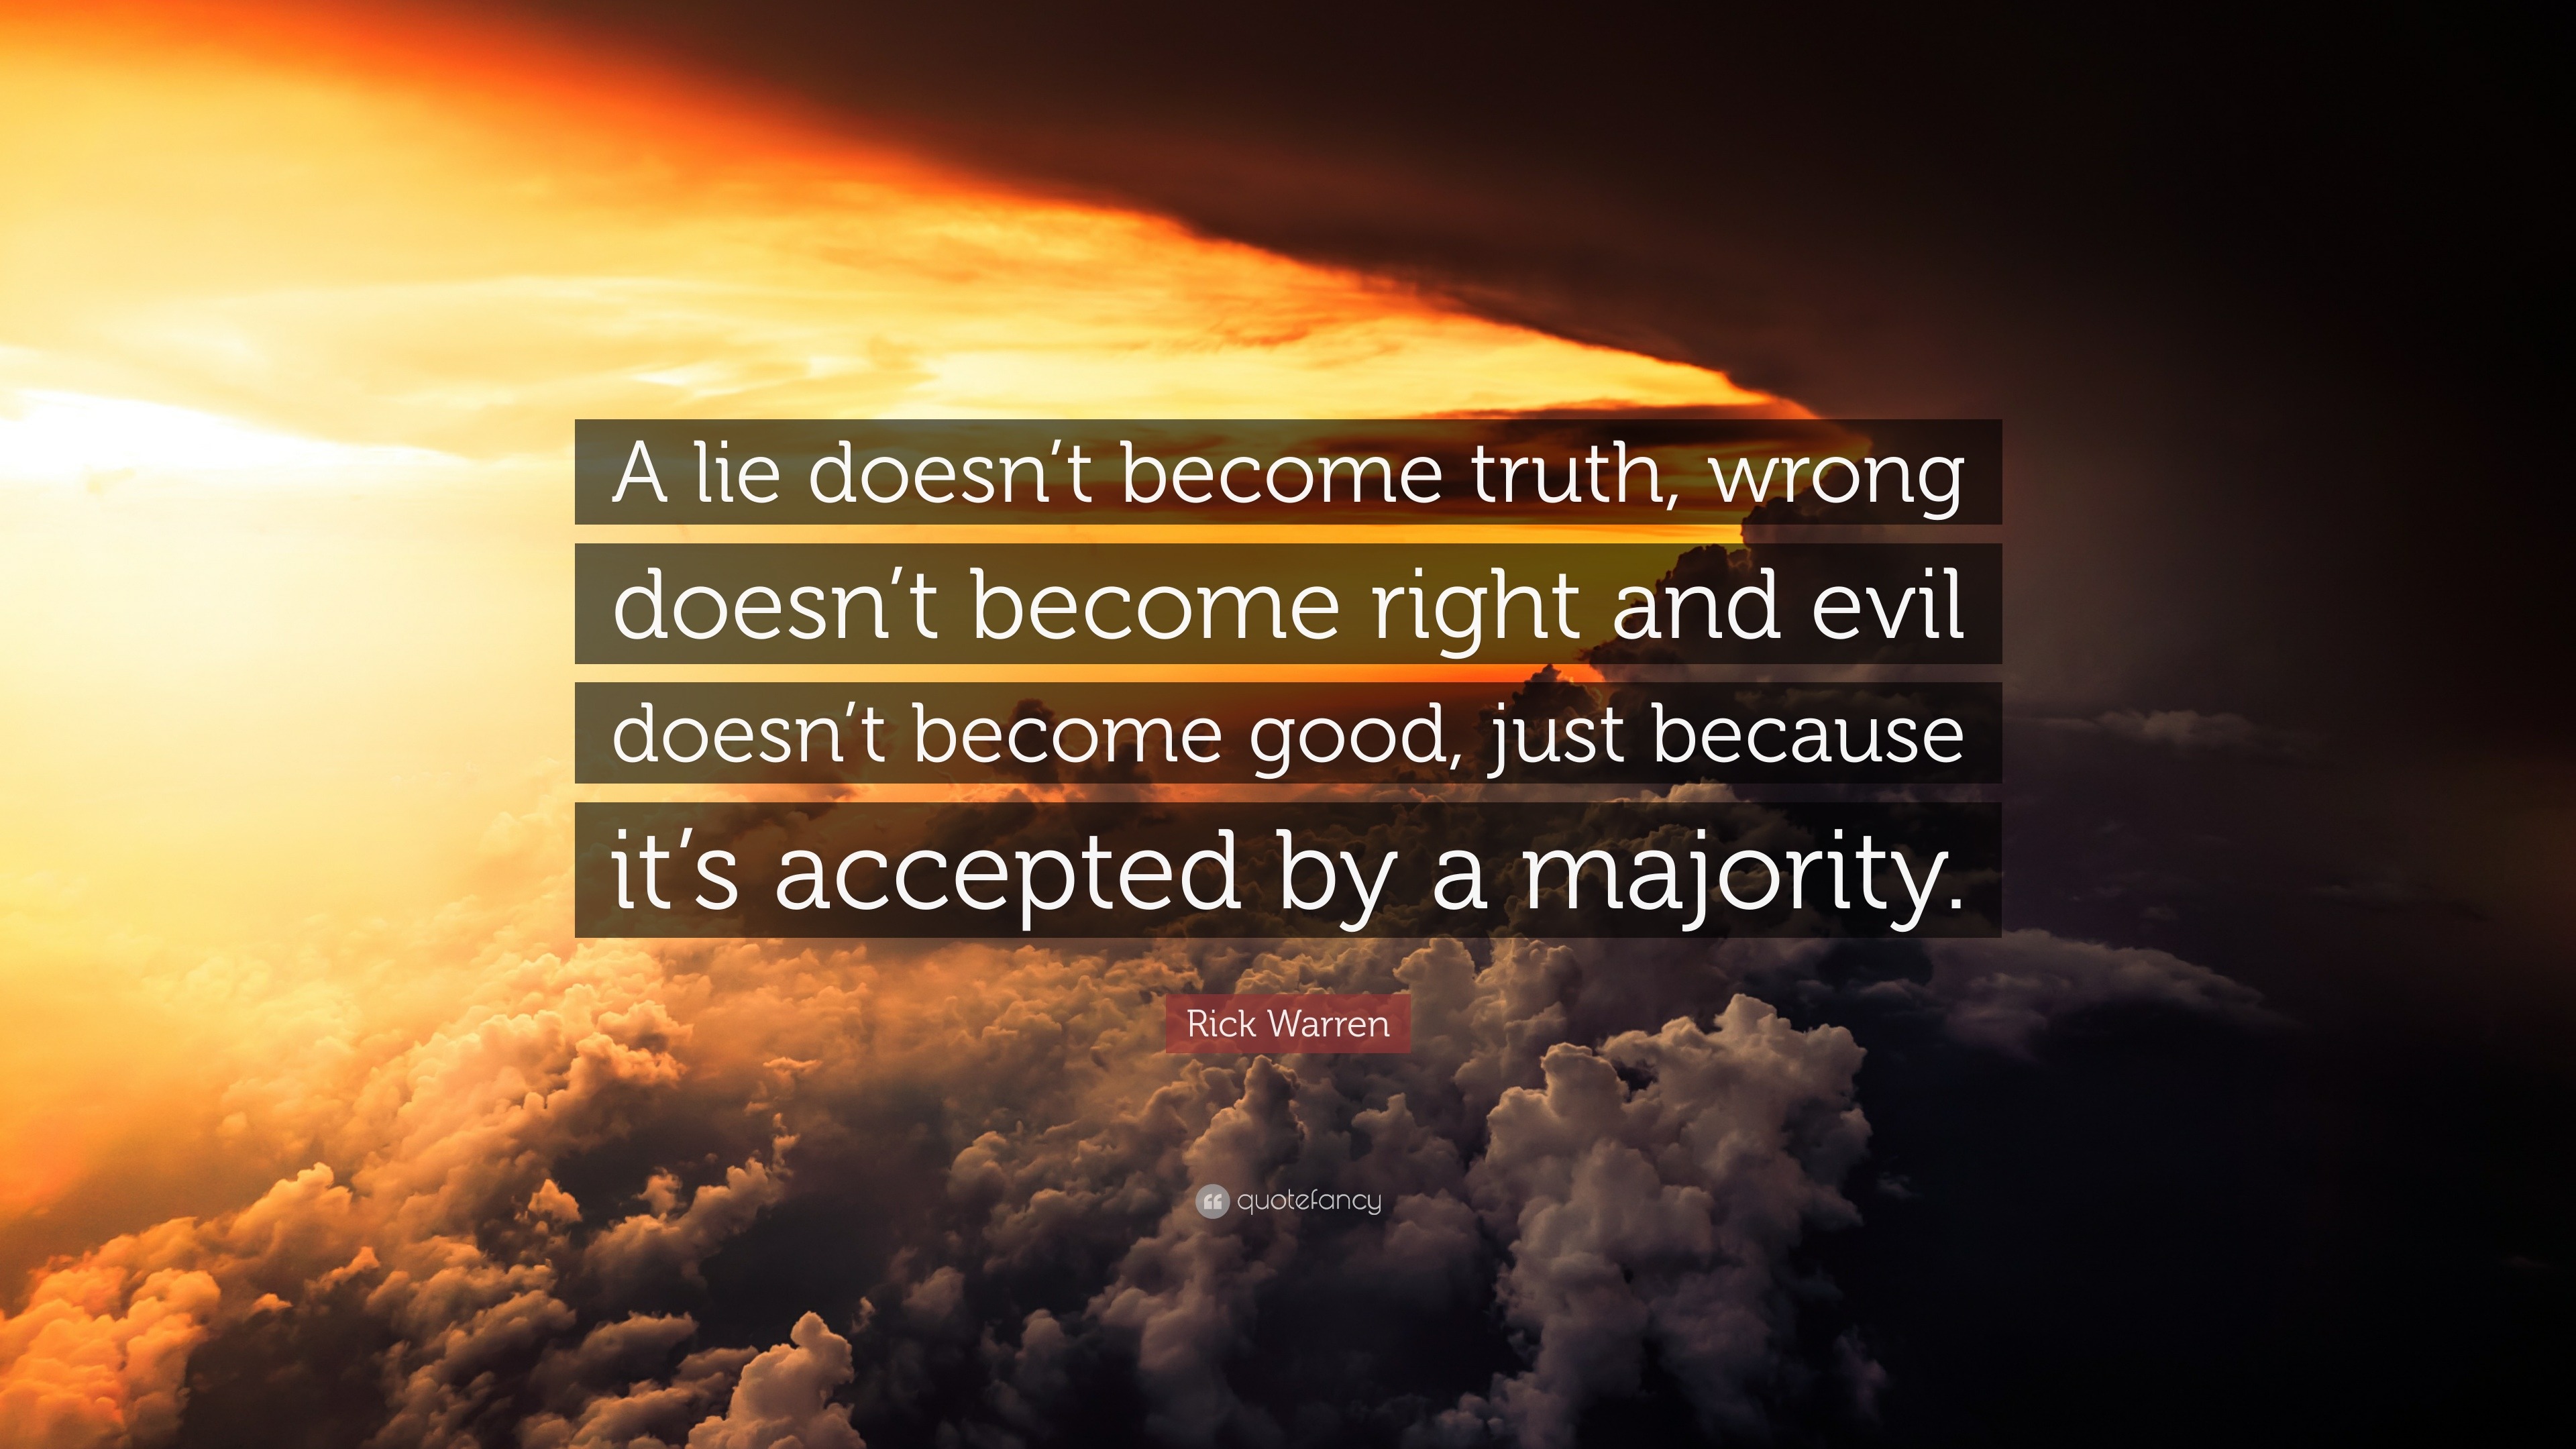 Rick Warren Quote A Lie Doesn T Become Truth Wrong Doesn T Become Right And Evil Doesn T Become Good Just Because It S Accepted By A Maj